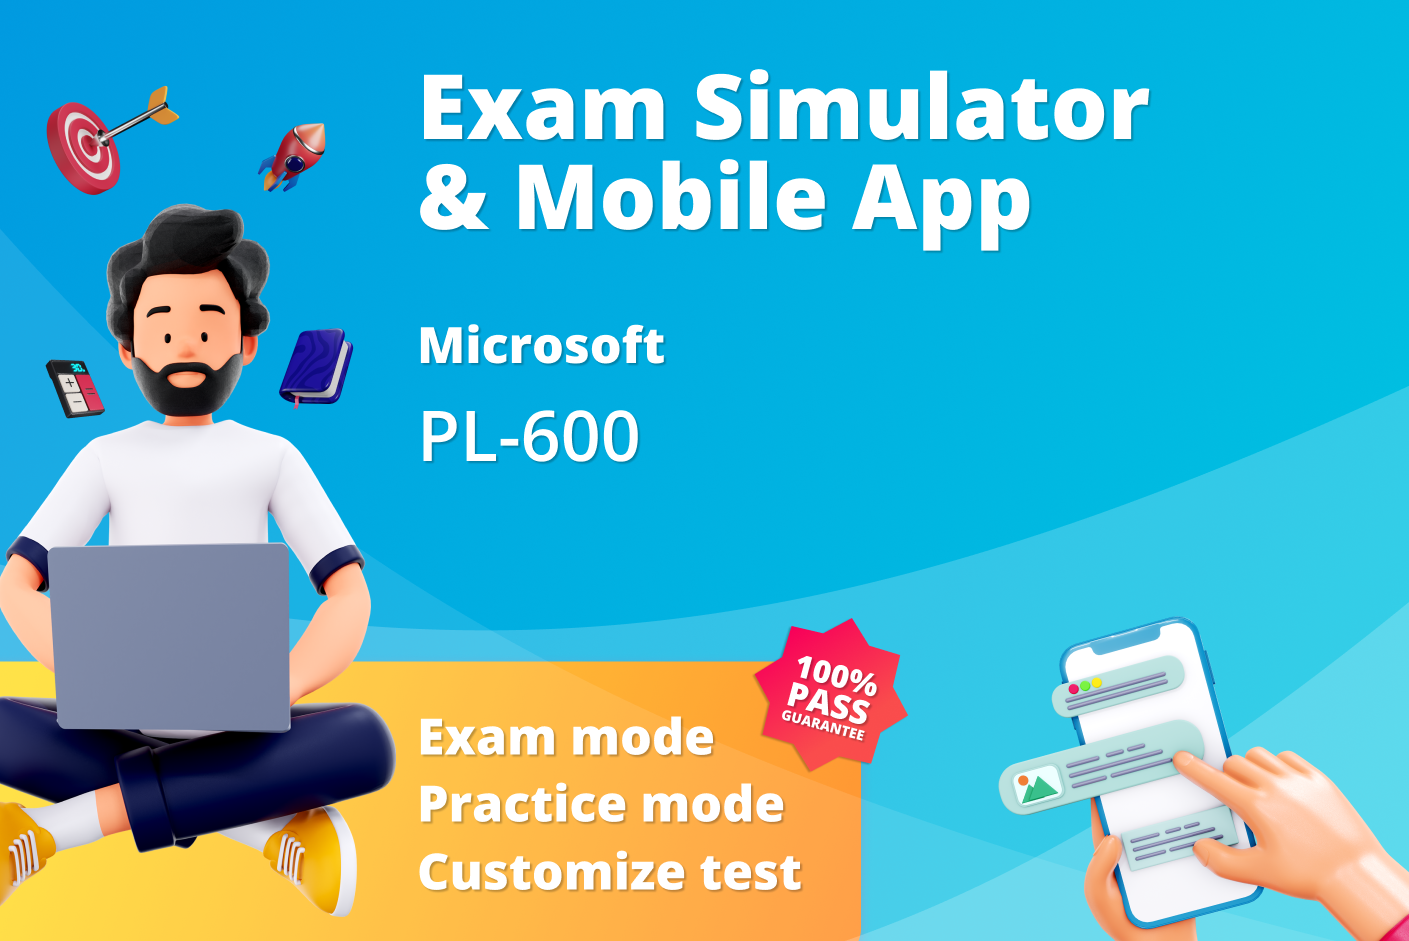 Prepare for success with the official PL-600 mock exam for United Kingdom candidates